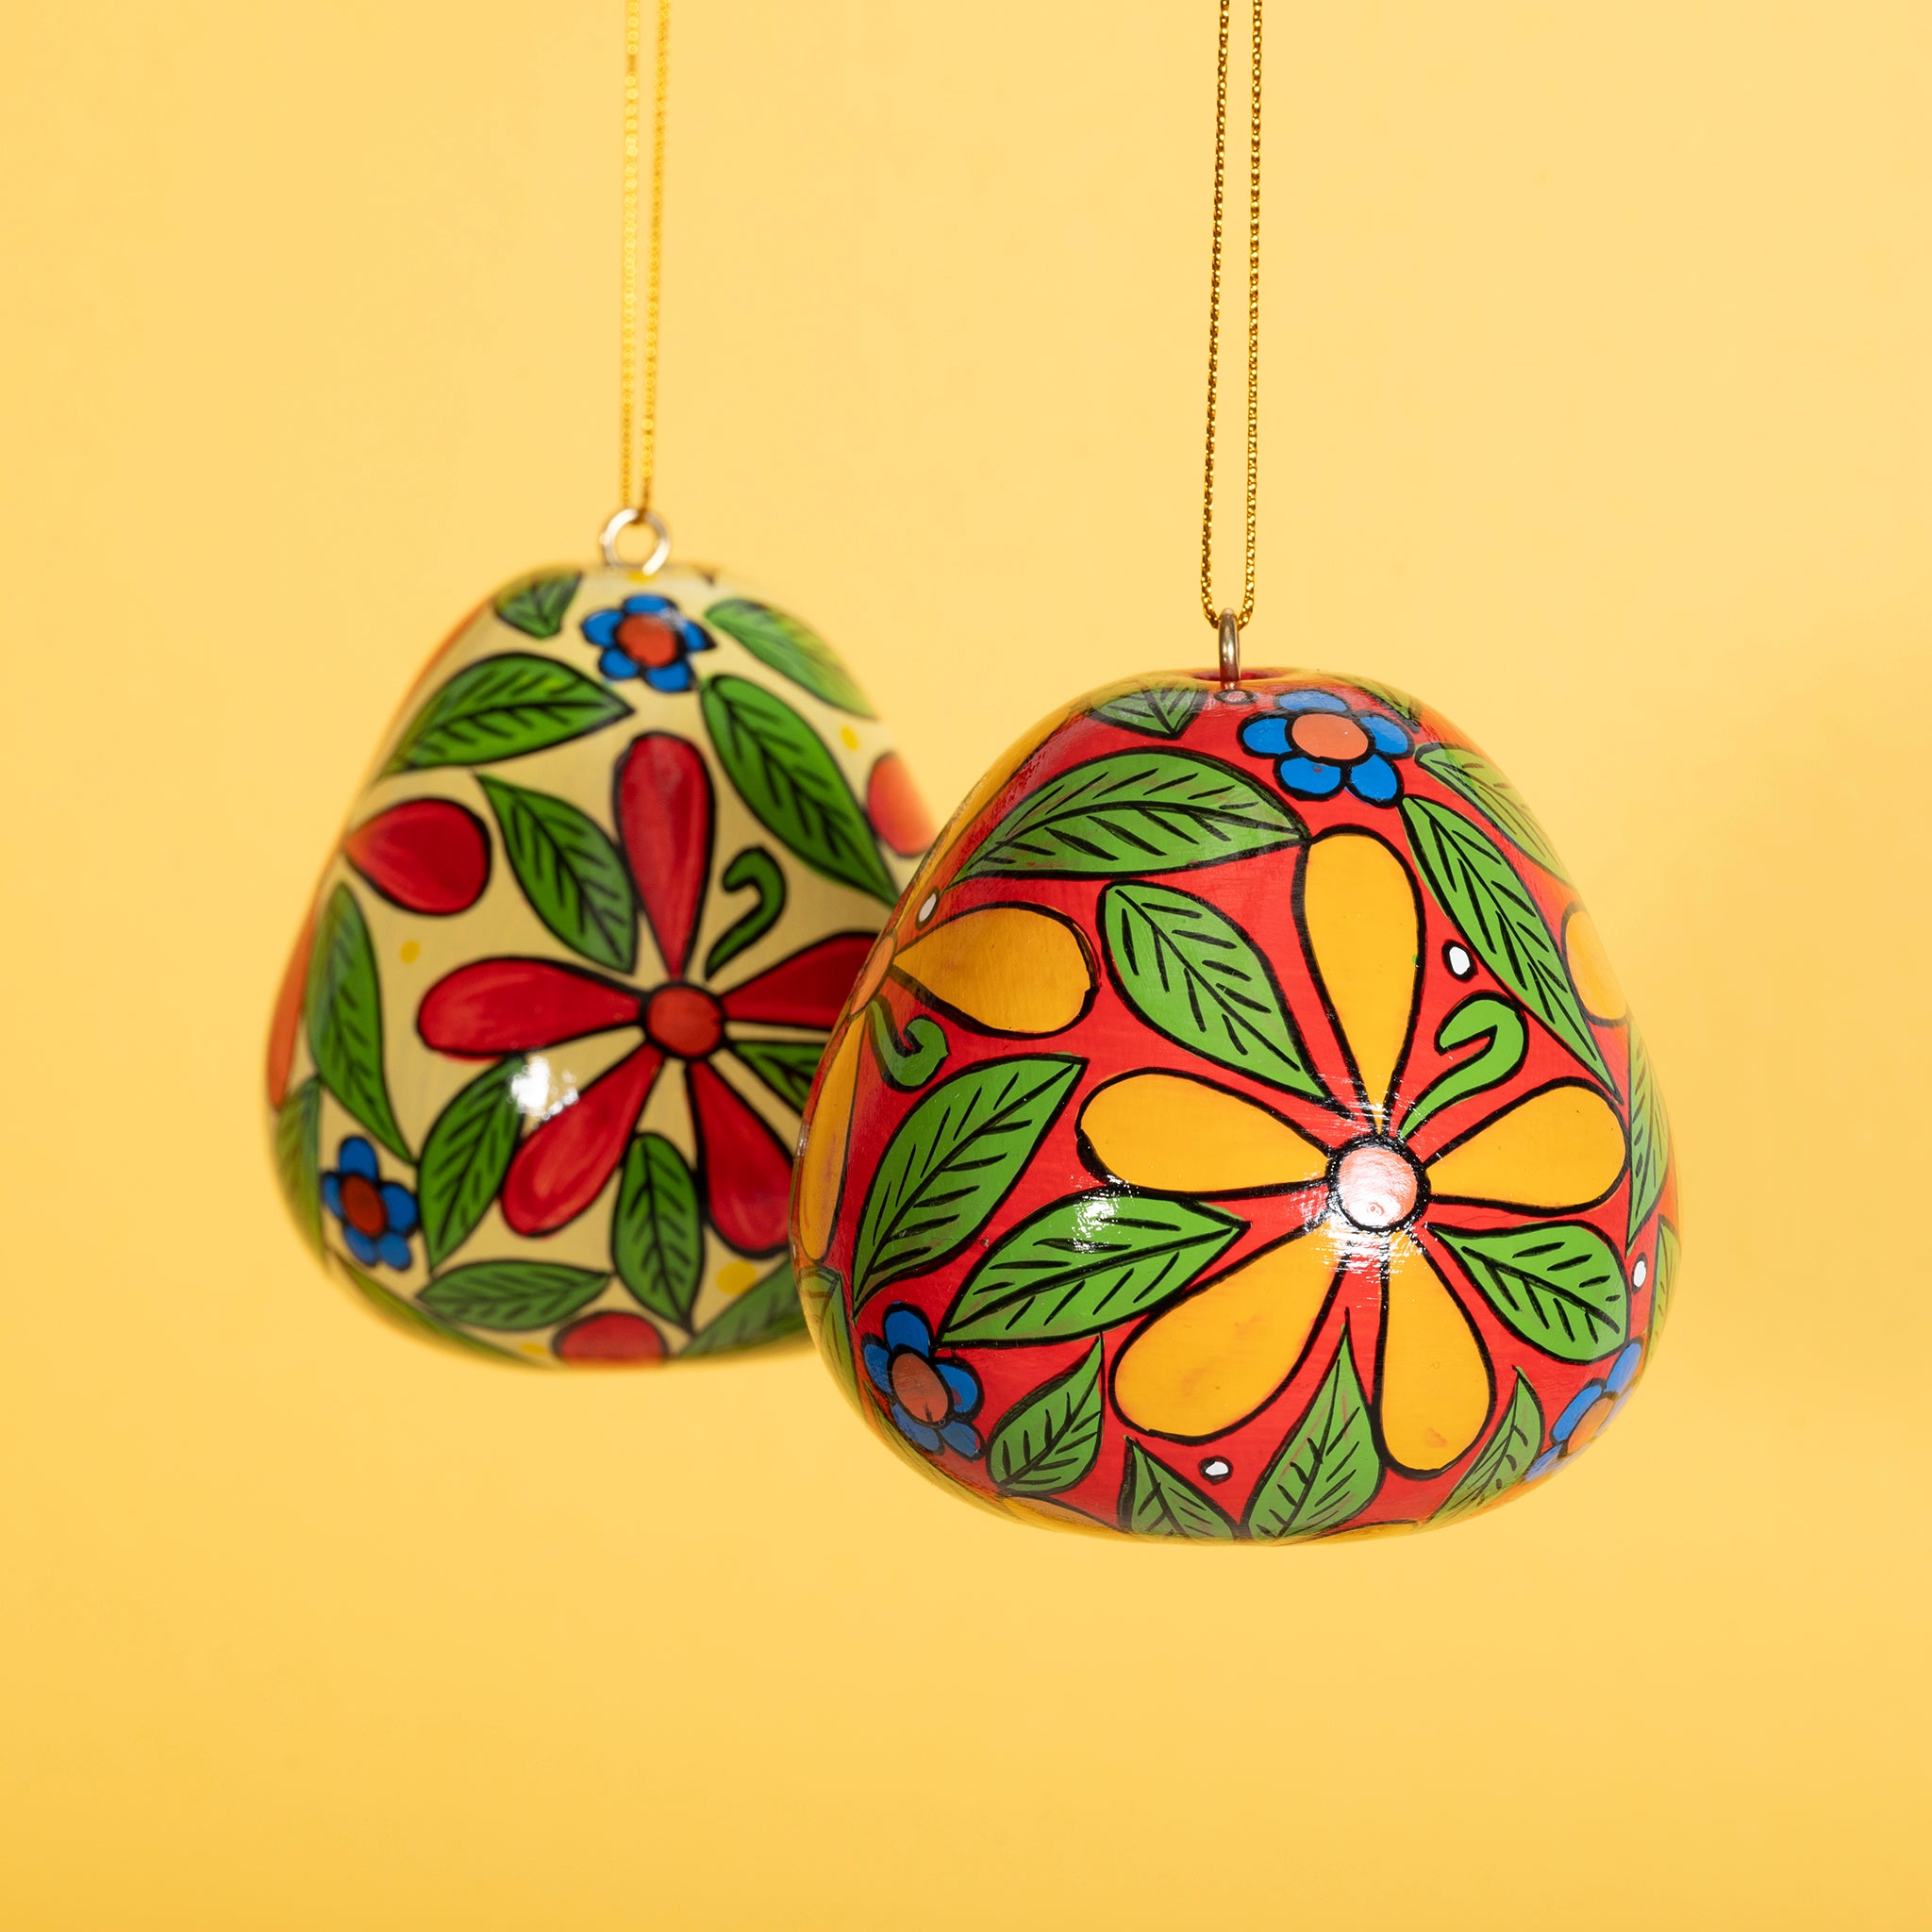 Flowers - Painted Gourd Ornament (sold as 6's)